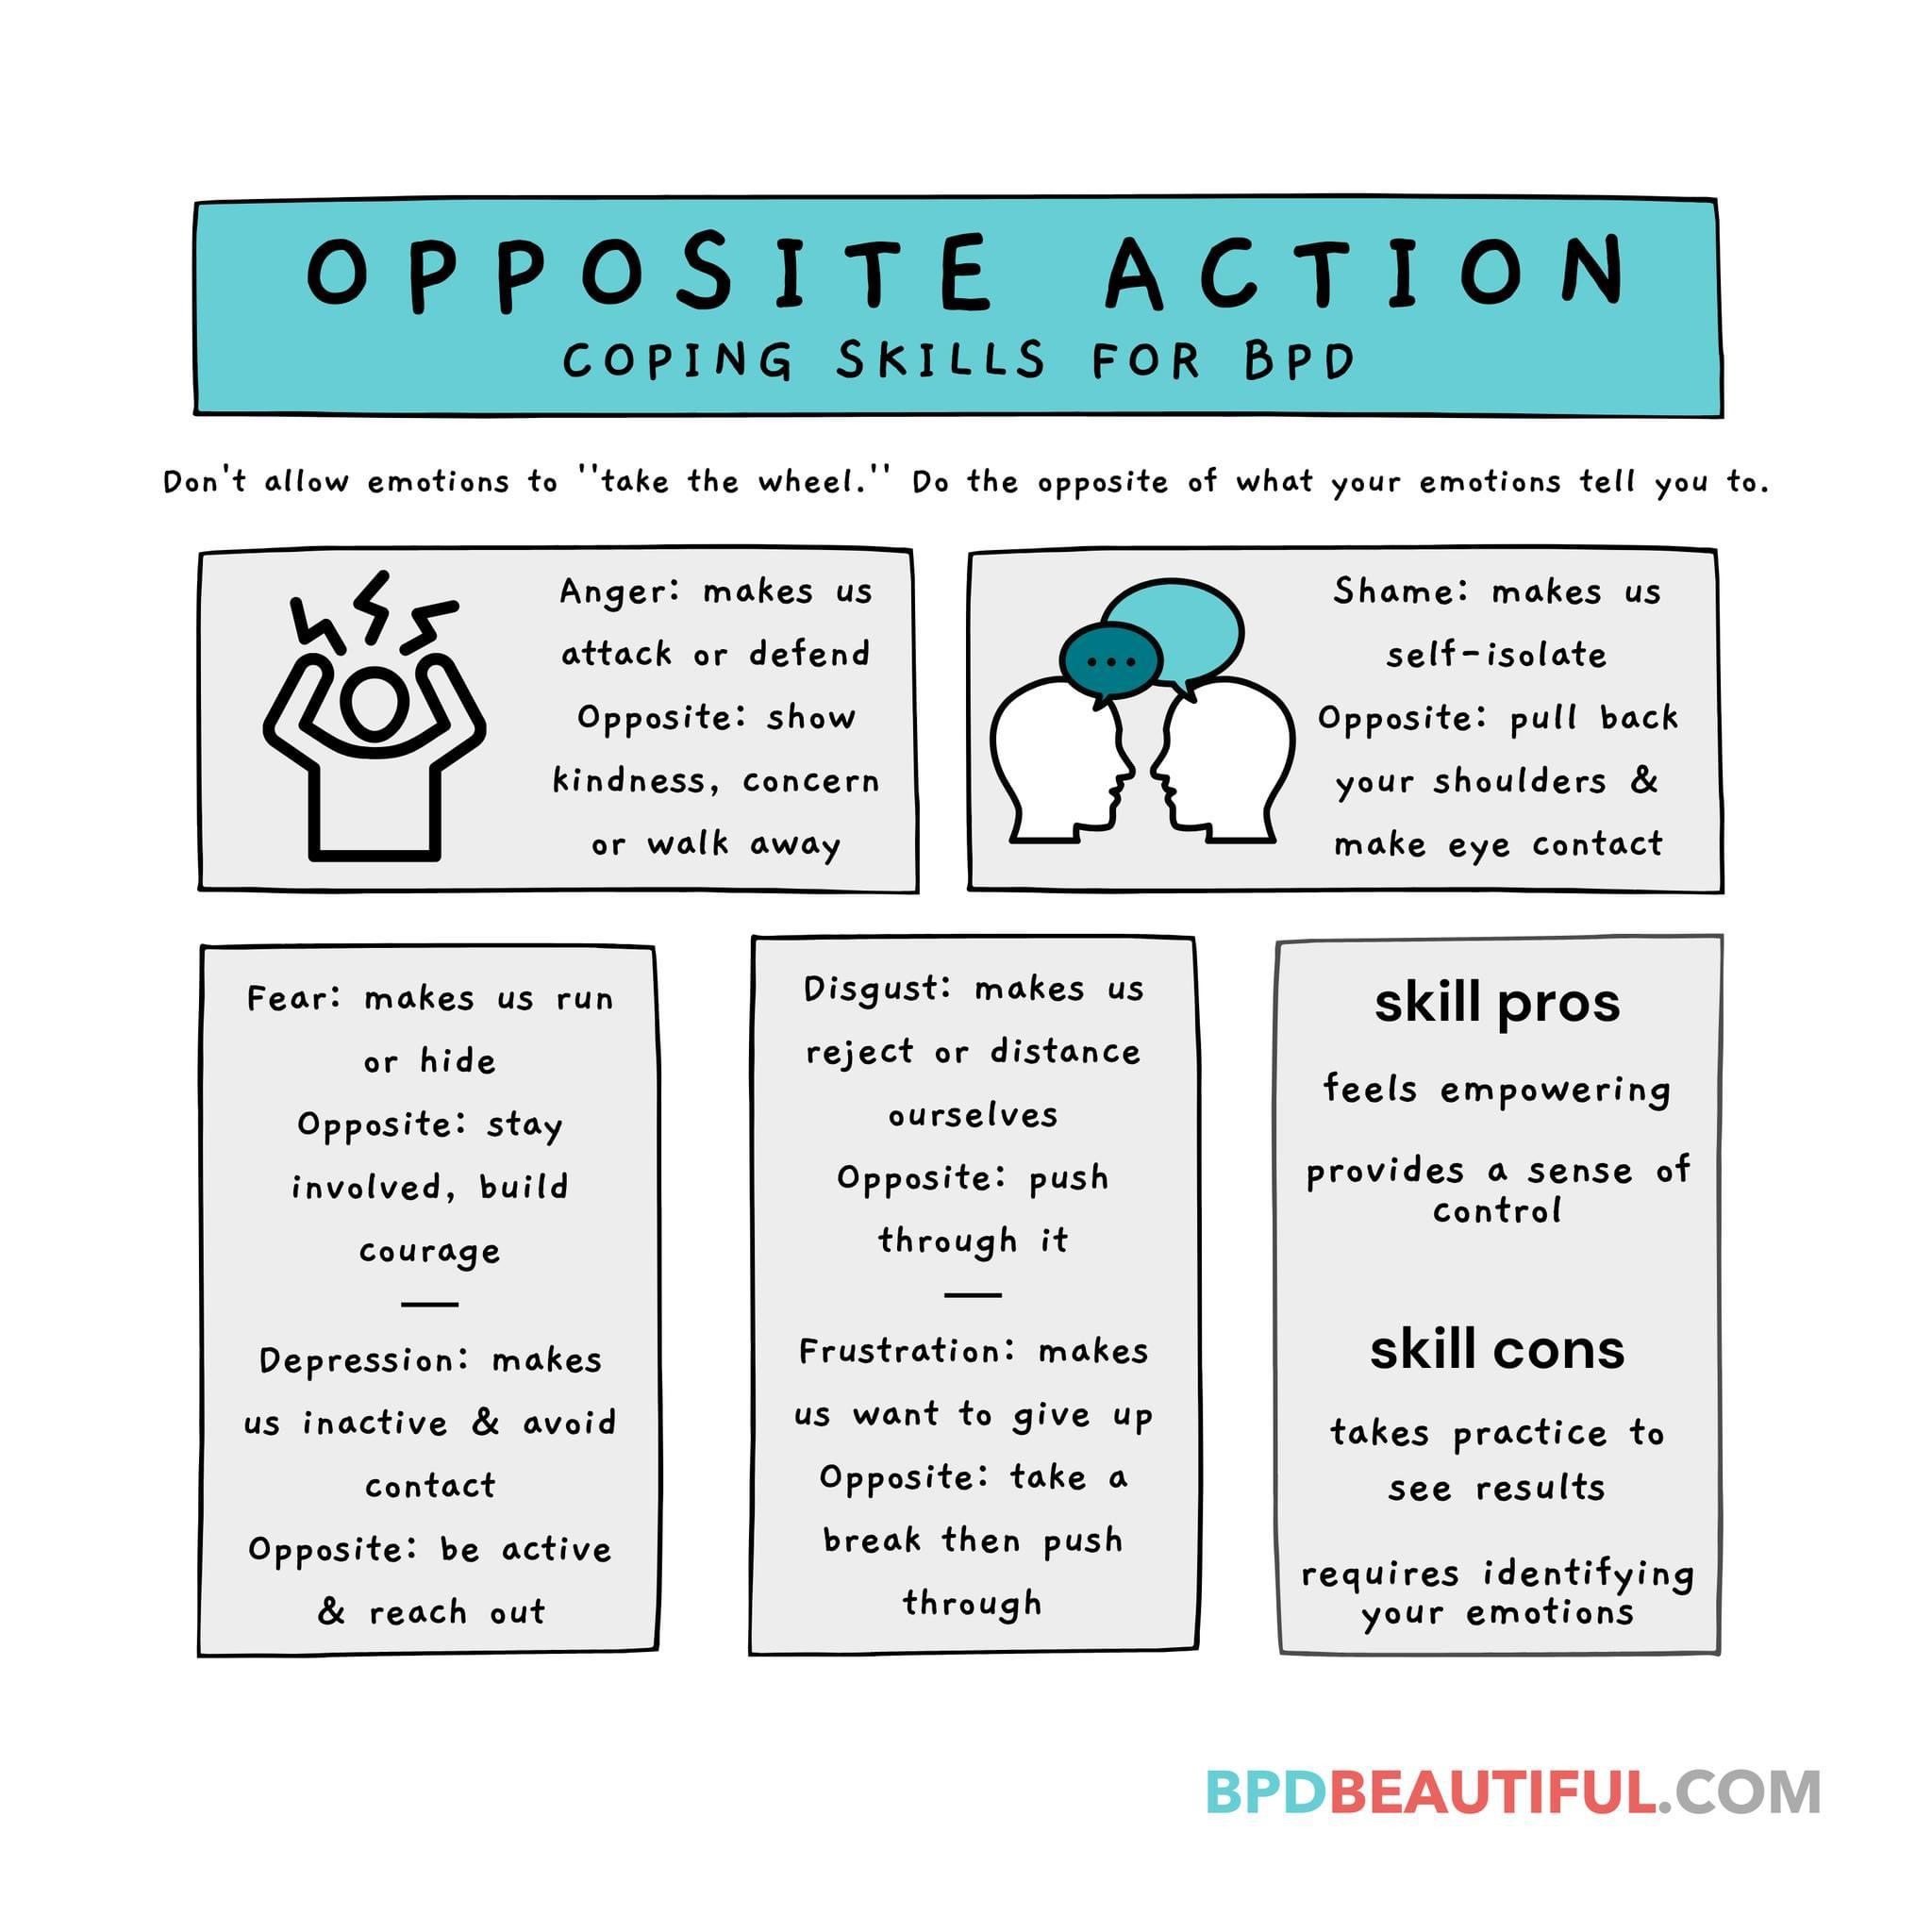 coping skills for bpd: opposite action graphic from bpd beautiful's instagram